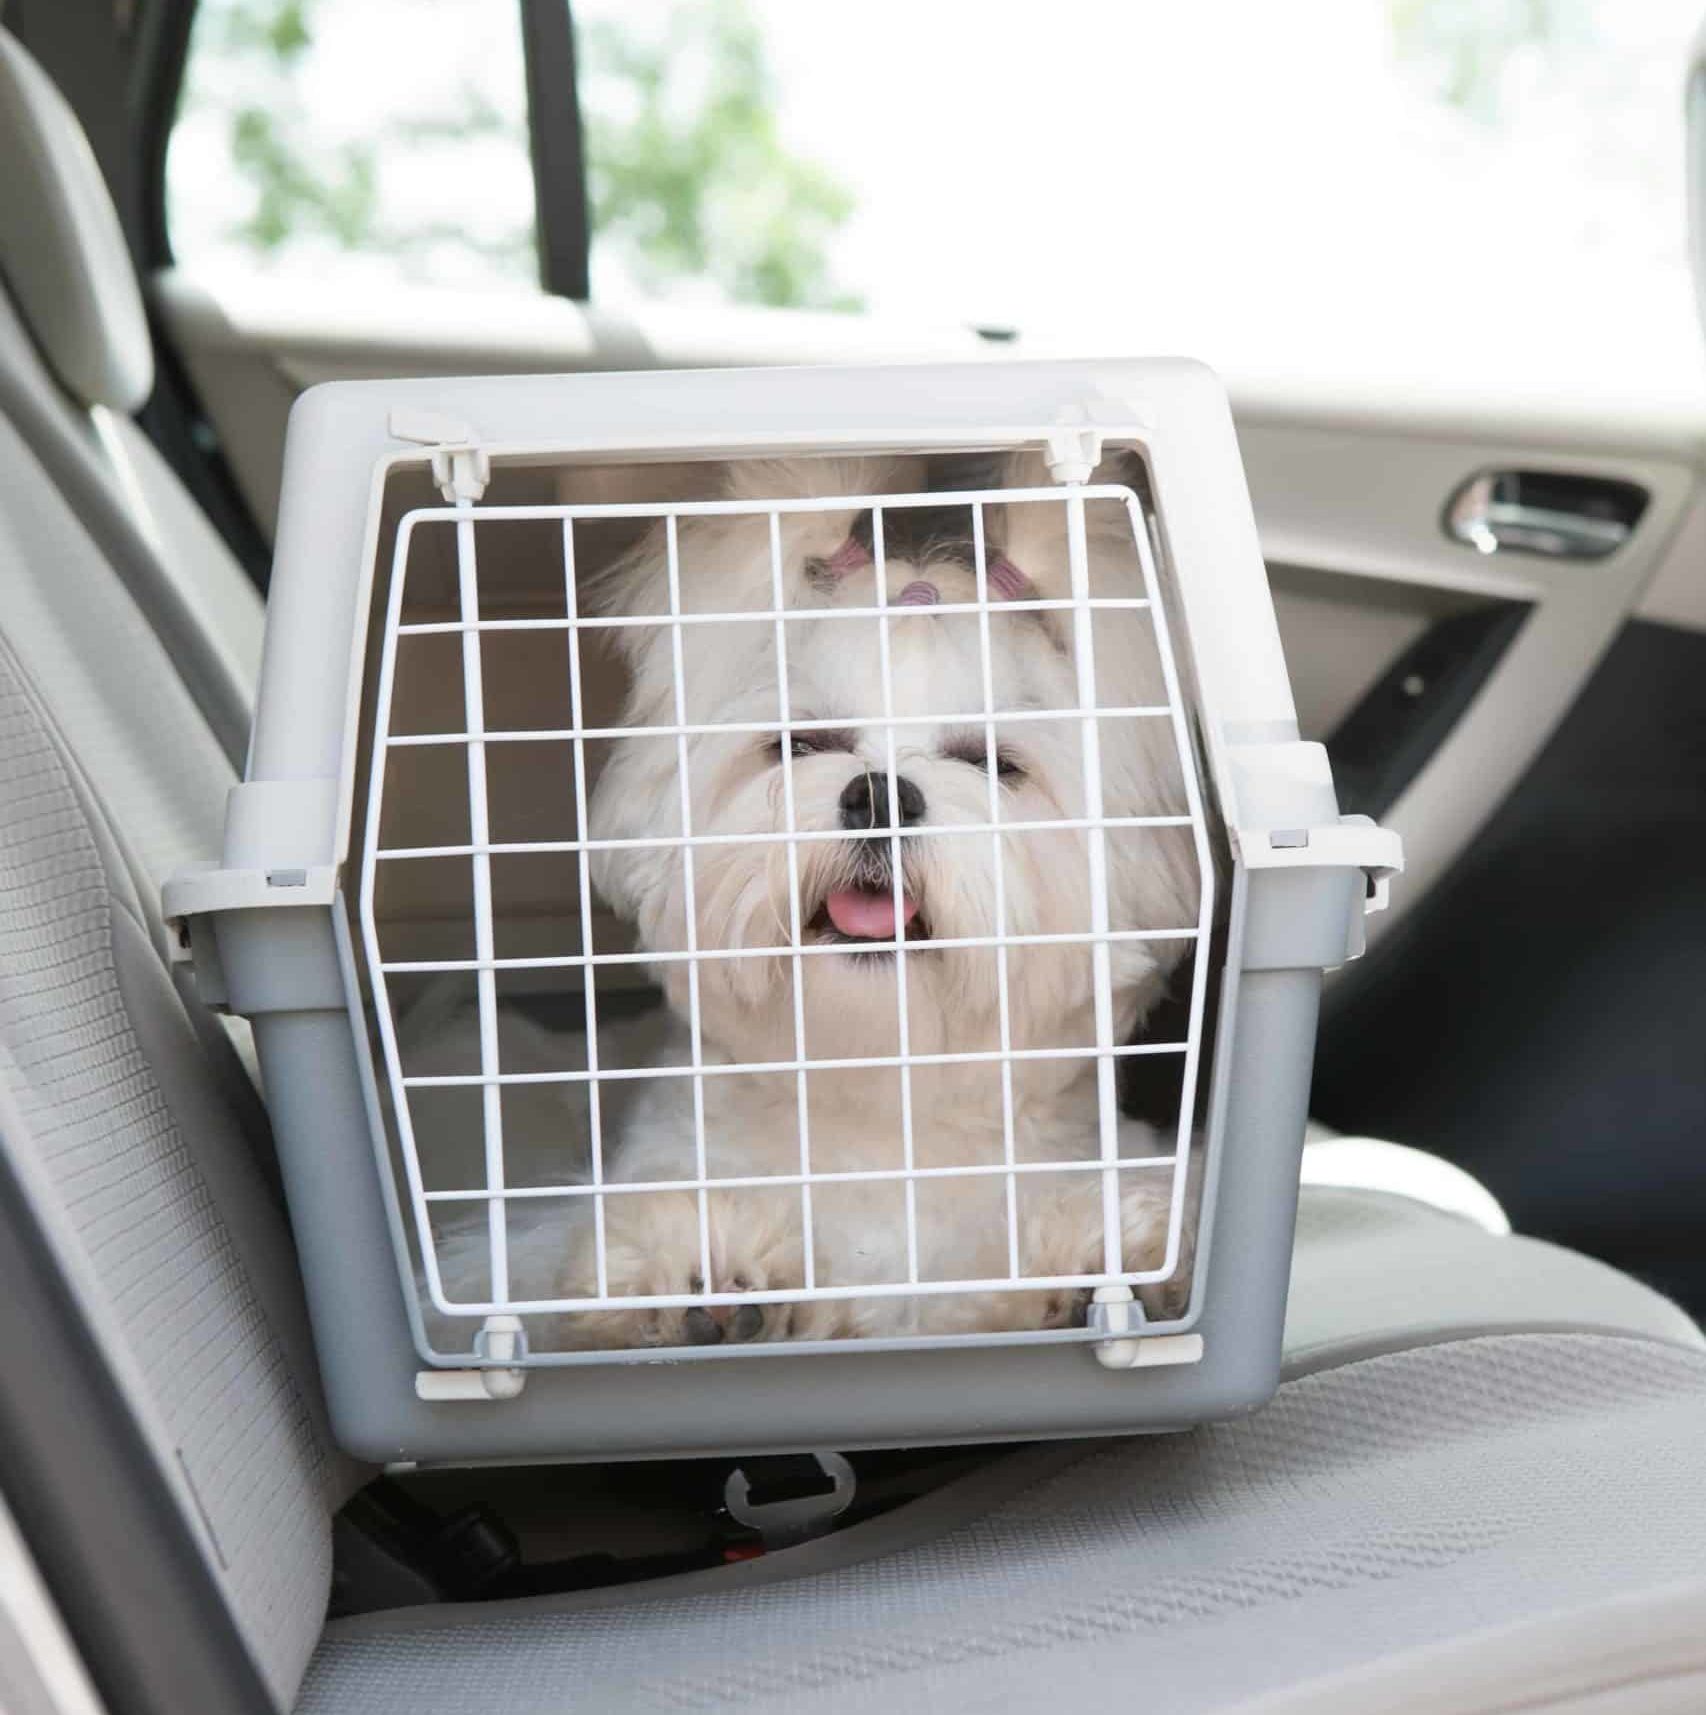 Shih Tzu rides in a crate in the backseat of a car. Protect your travel companion by keeping your dog secure in the back seat.